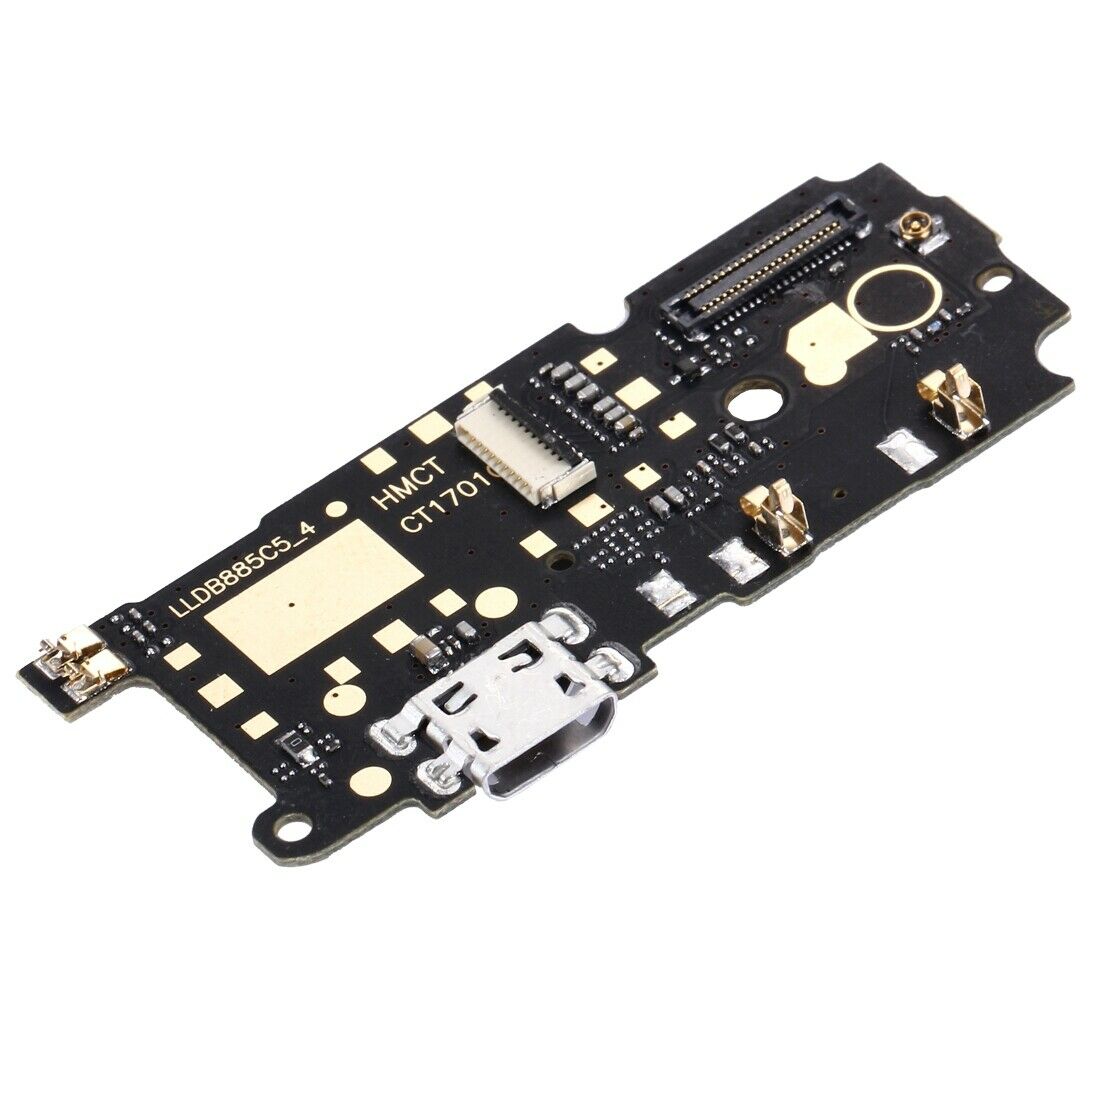 Xiaomi Redmi Note 4 Charging Port Board With Mic for [product_price] - First Help Tech